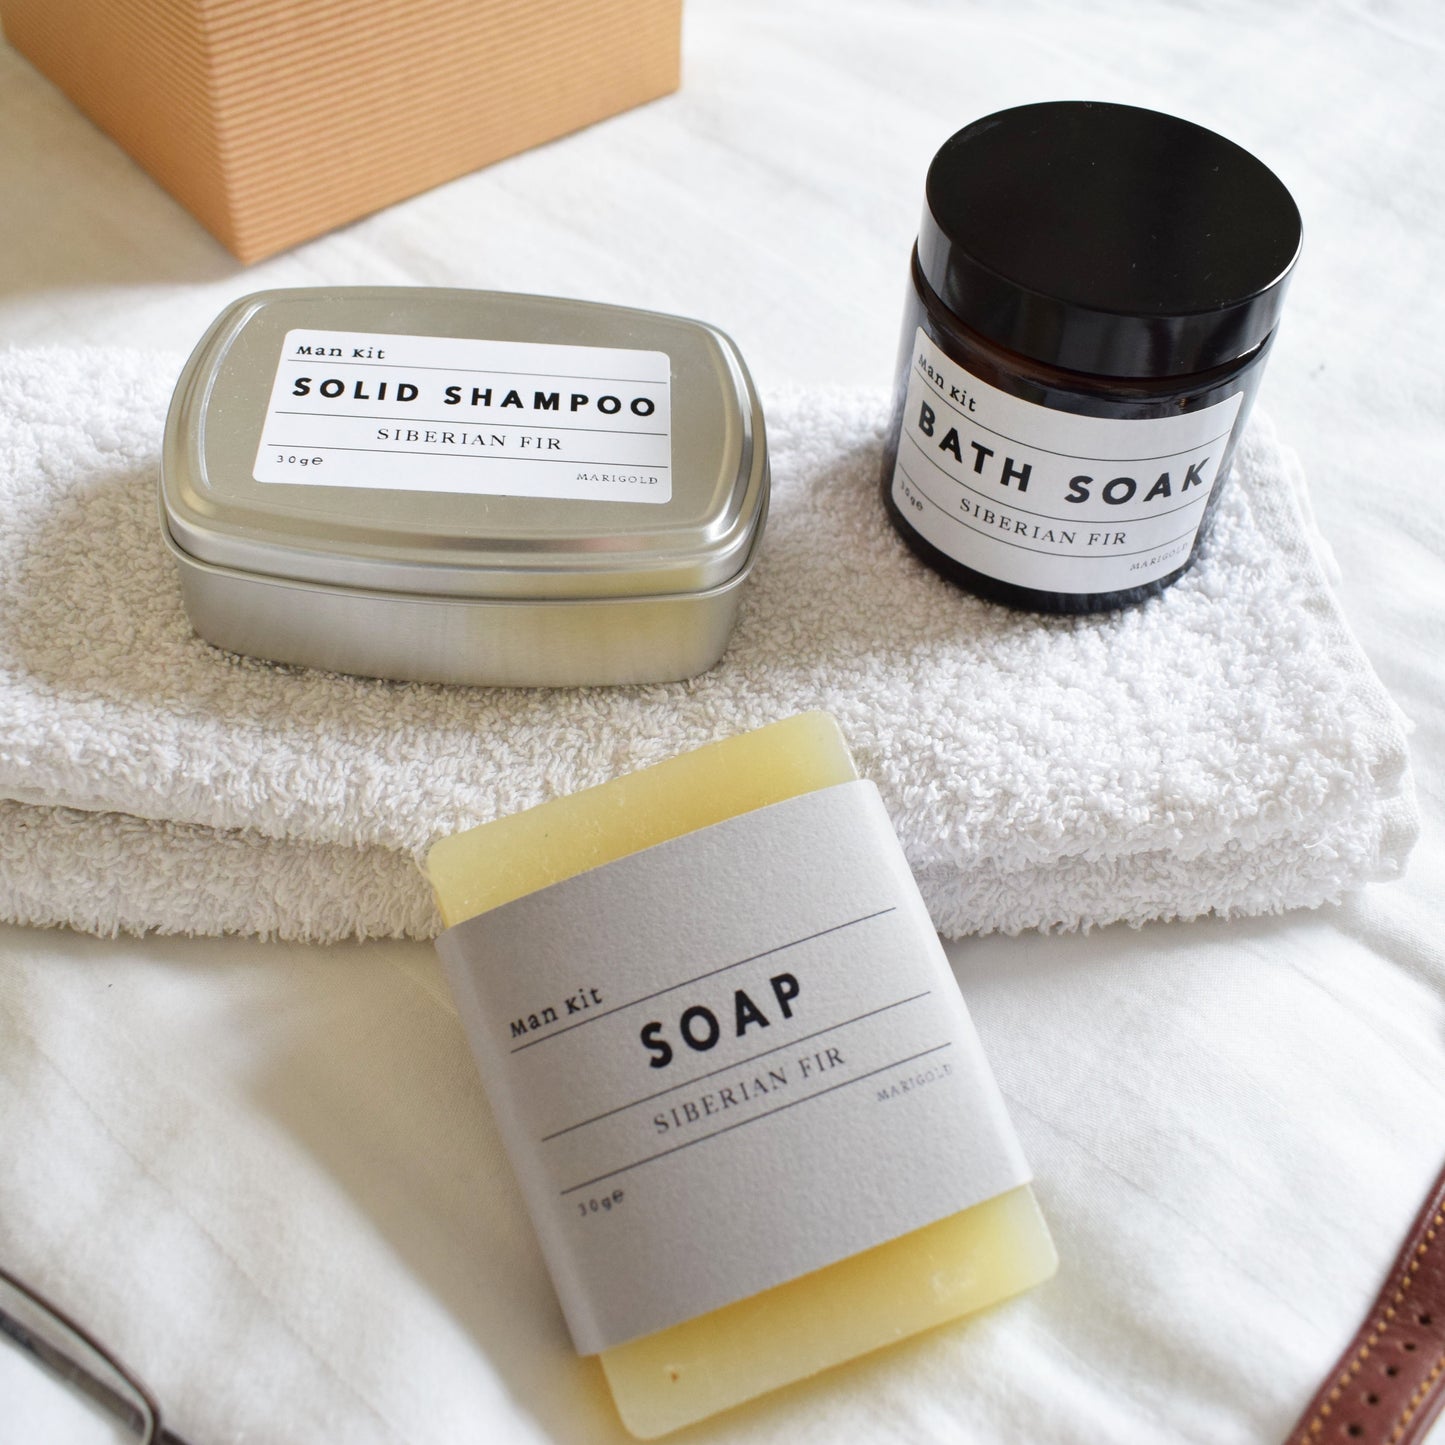 Personalised Vegan Mens Grooming Gift Collection